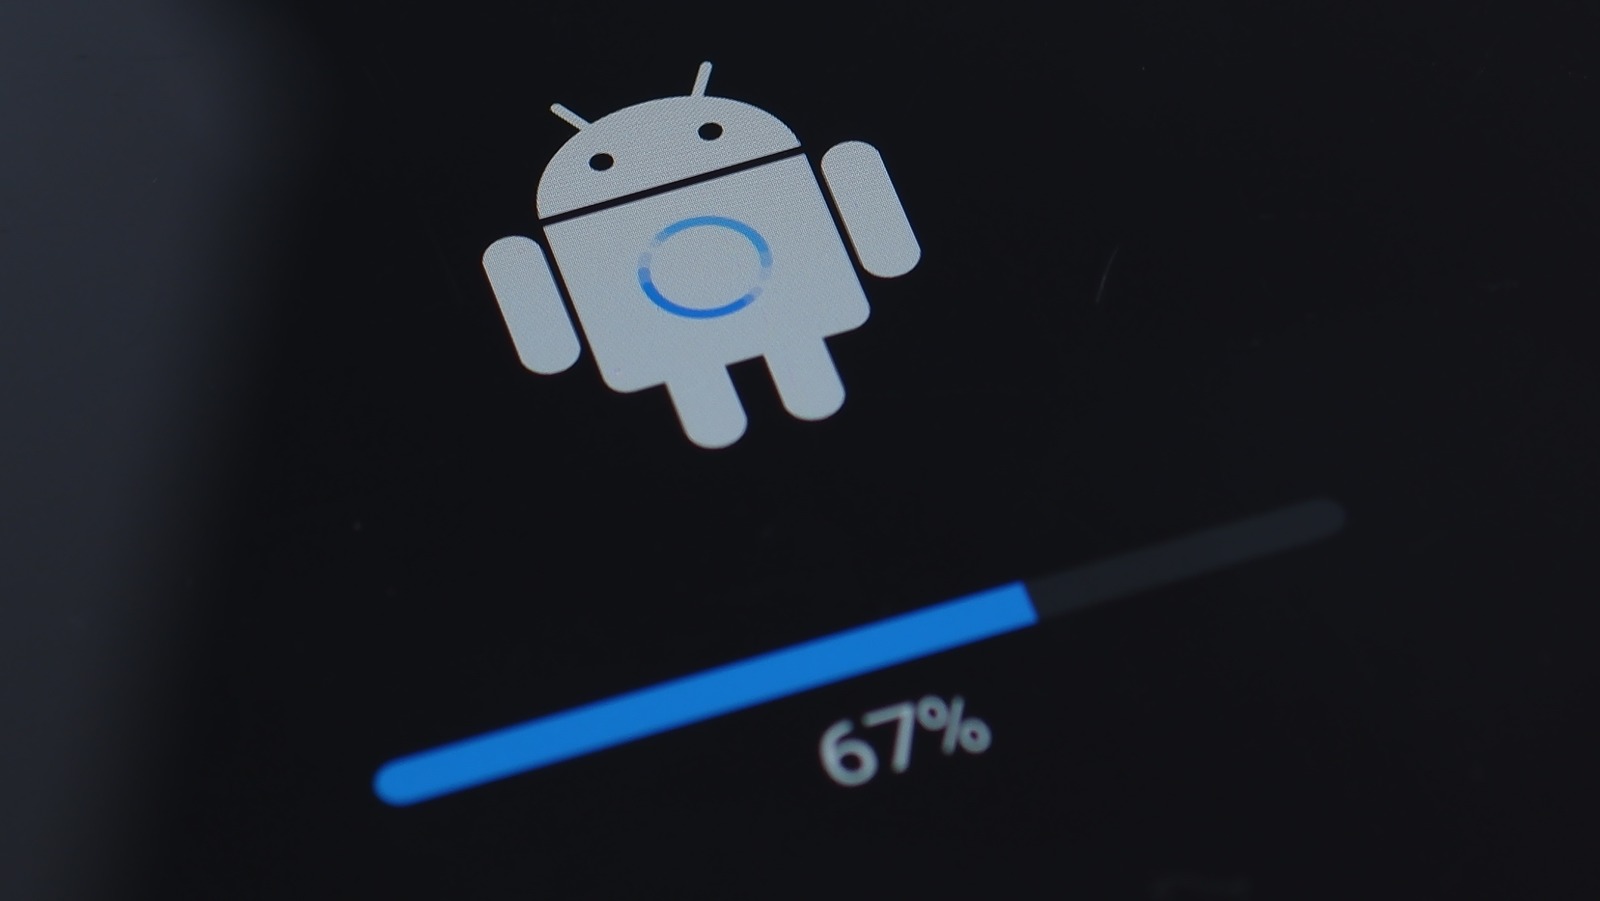 how-to-update-software-on-android